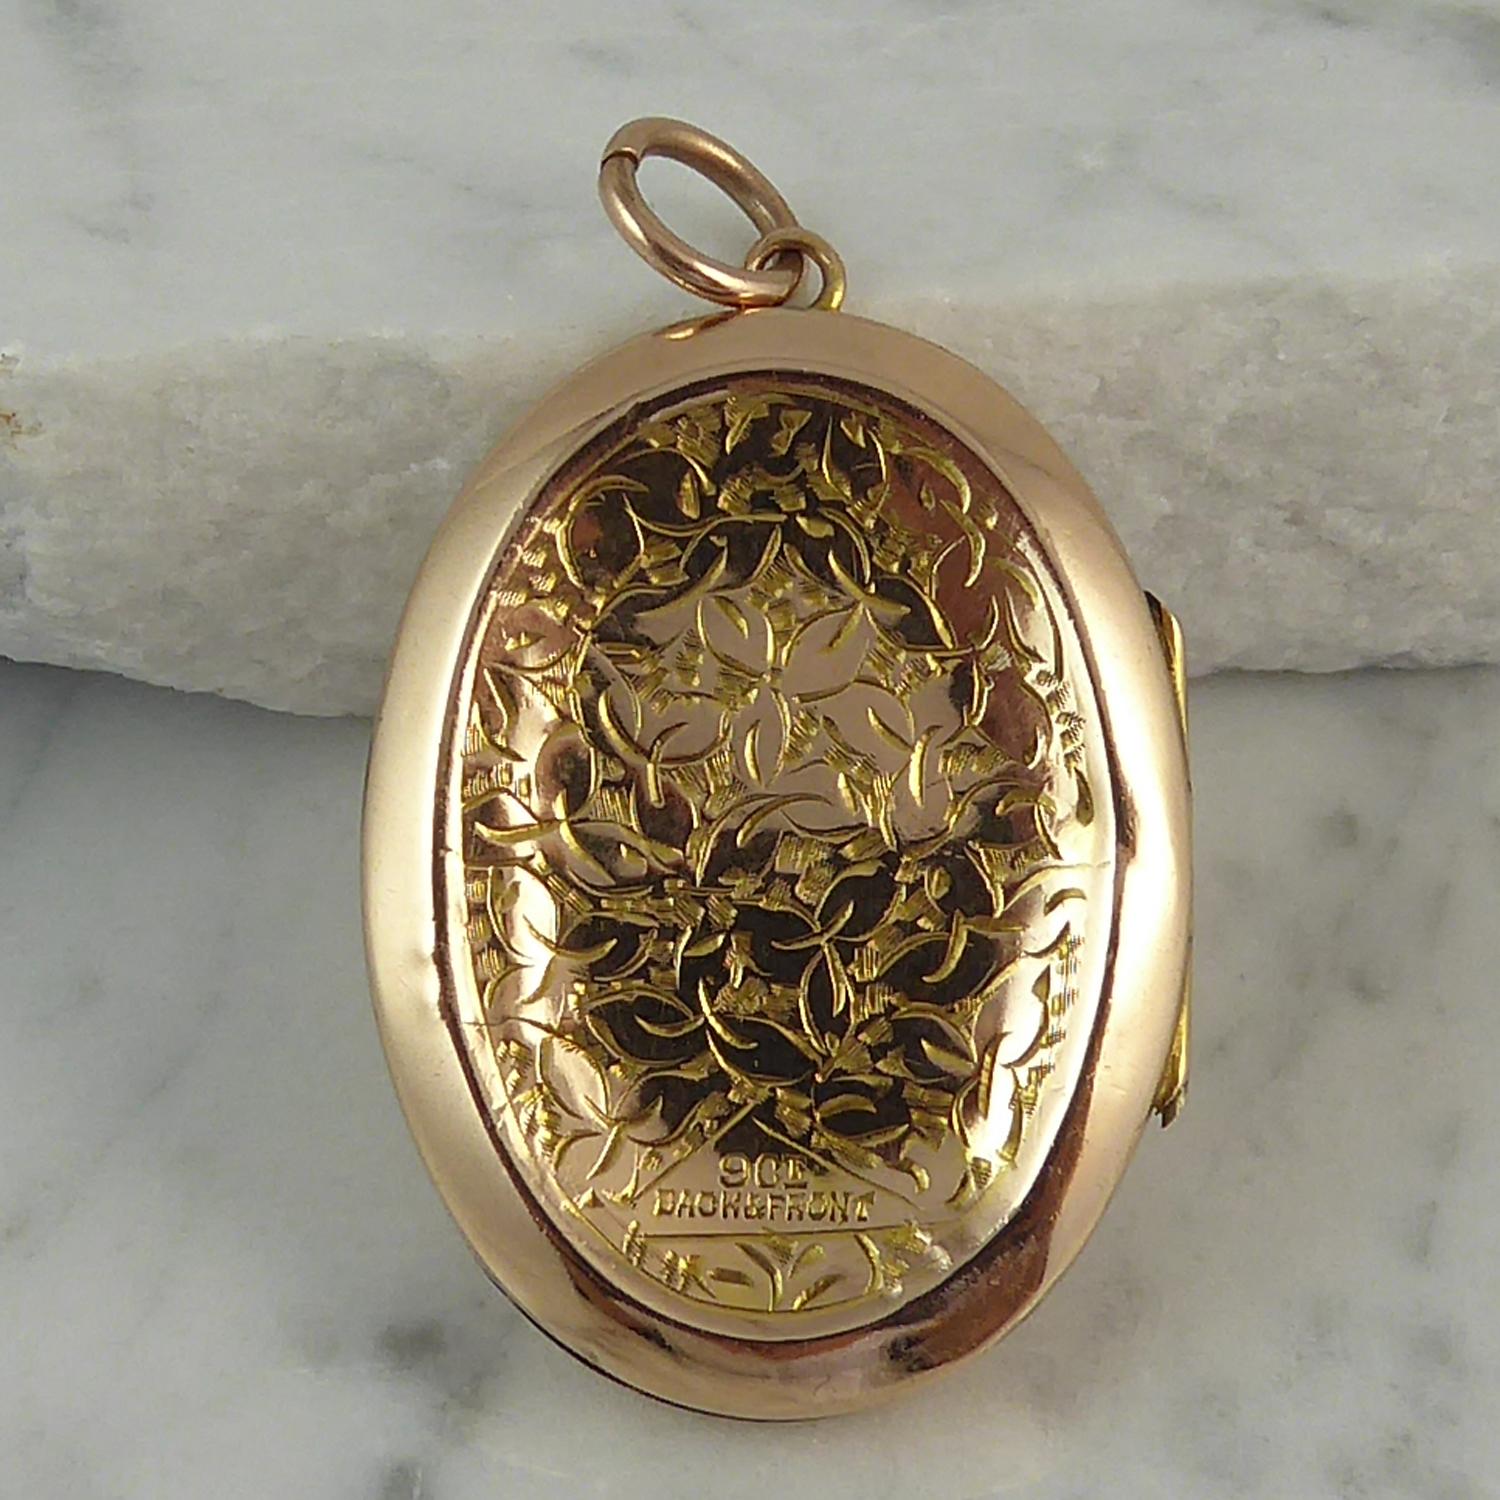 A beautiful little antique locket in 9ct gold back and front.  Oval in shape and decorated to both sides in a foliate hand engraved pattern, the front also having a plain polished, shield-shaped cartouche.  The engraved sections are set in a slight